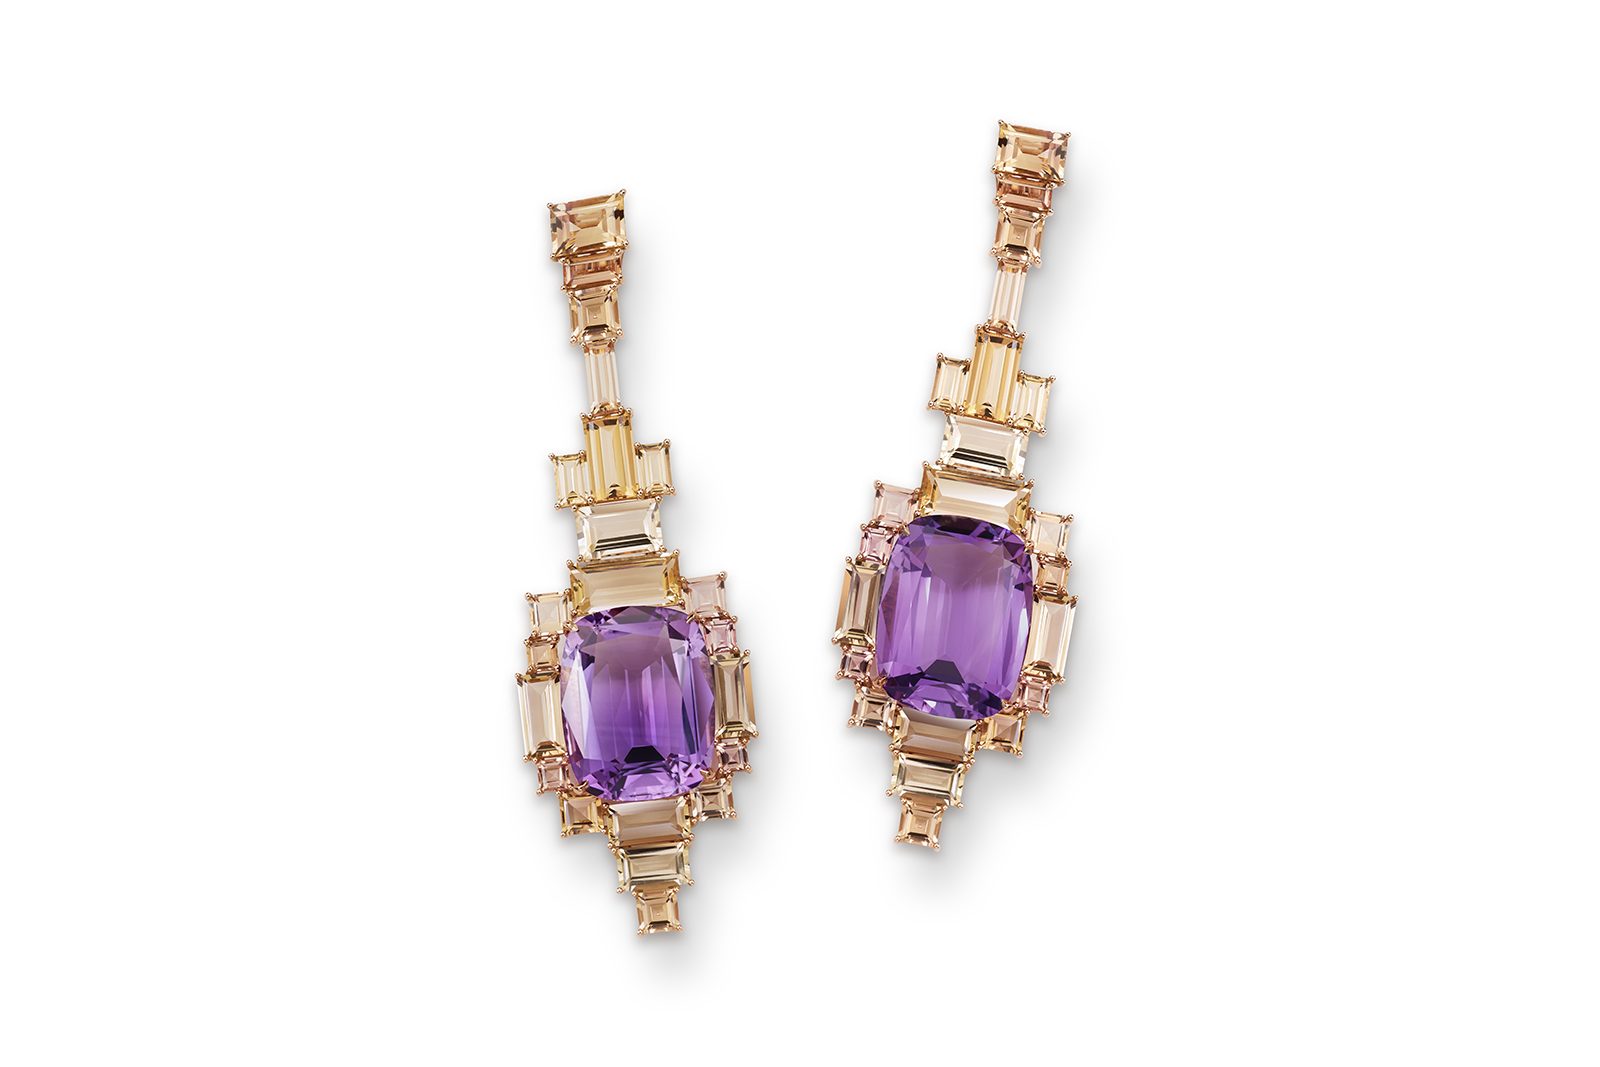 House of Geneva Horloge Fleurie Numéro 7 earrings with natural cushion cut amethysts, both over 14 carats each, and natural topazes totalling 14.09 and 15.12 carats